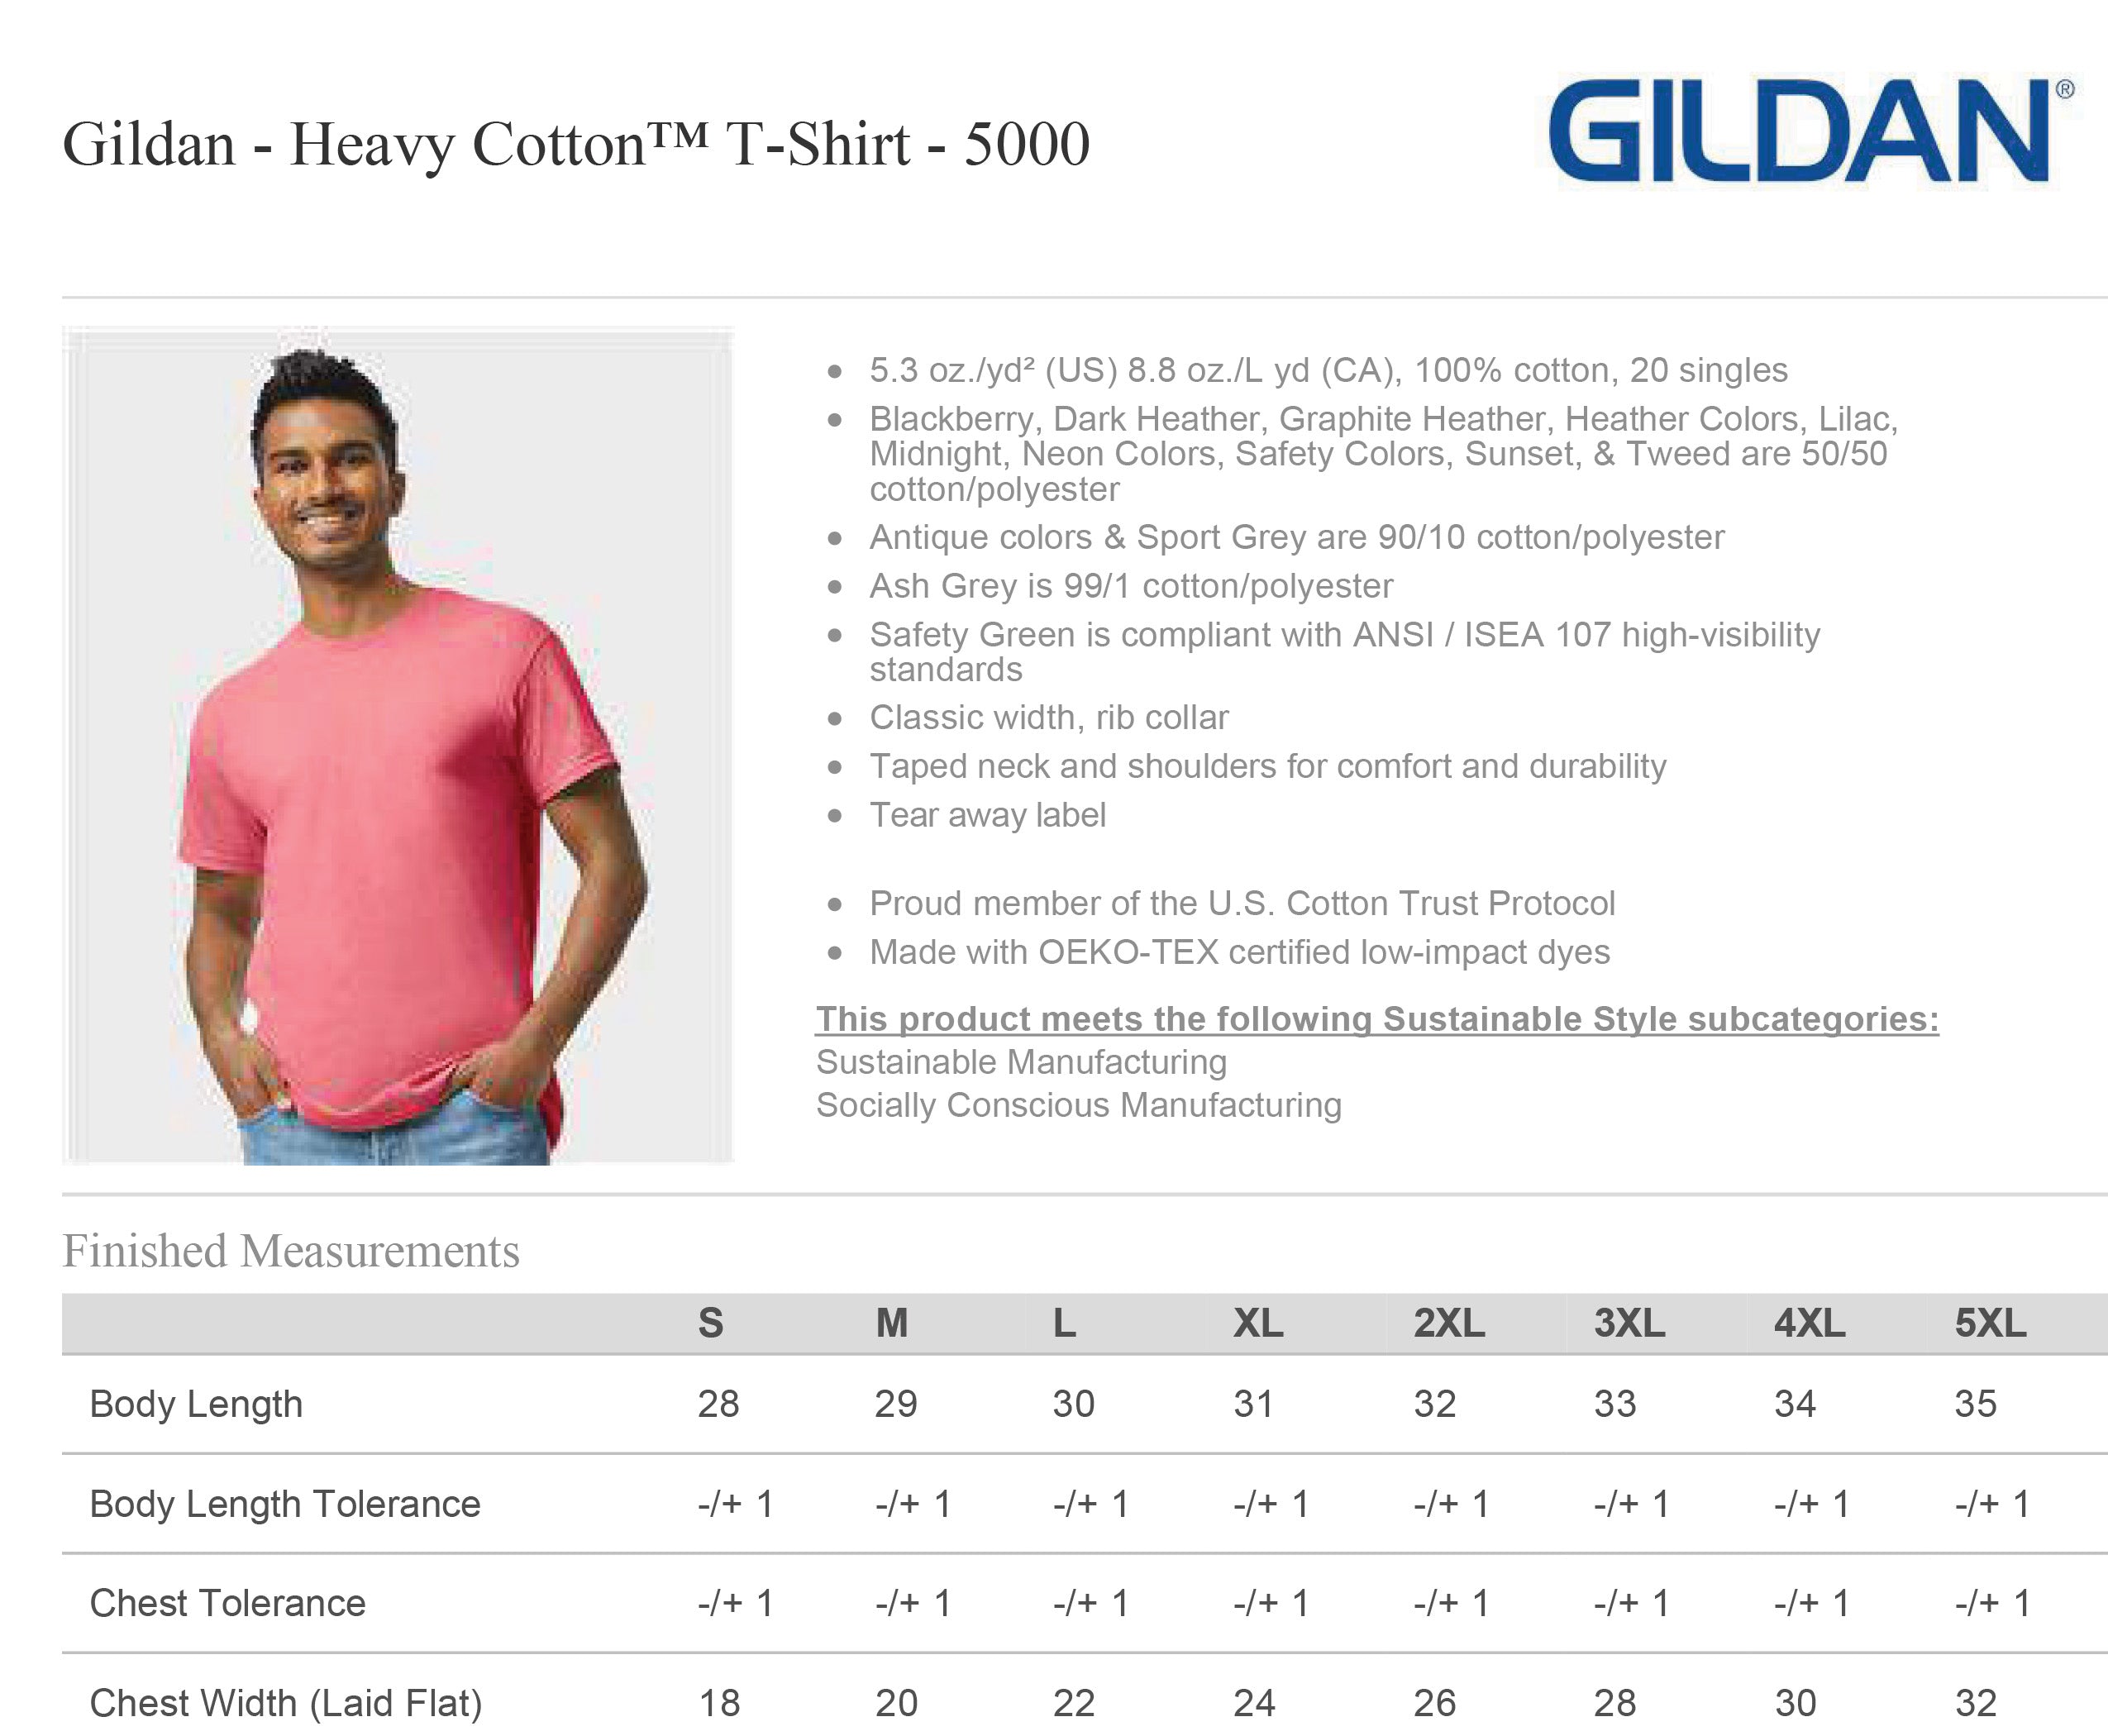 5000 Heavy Cotton Sizing Chart and Specs